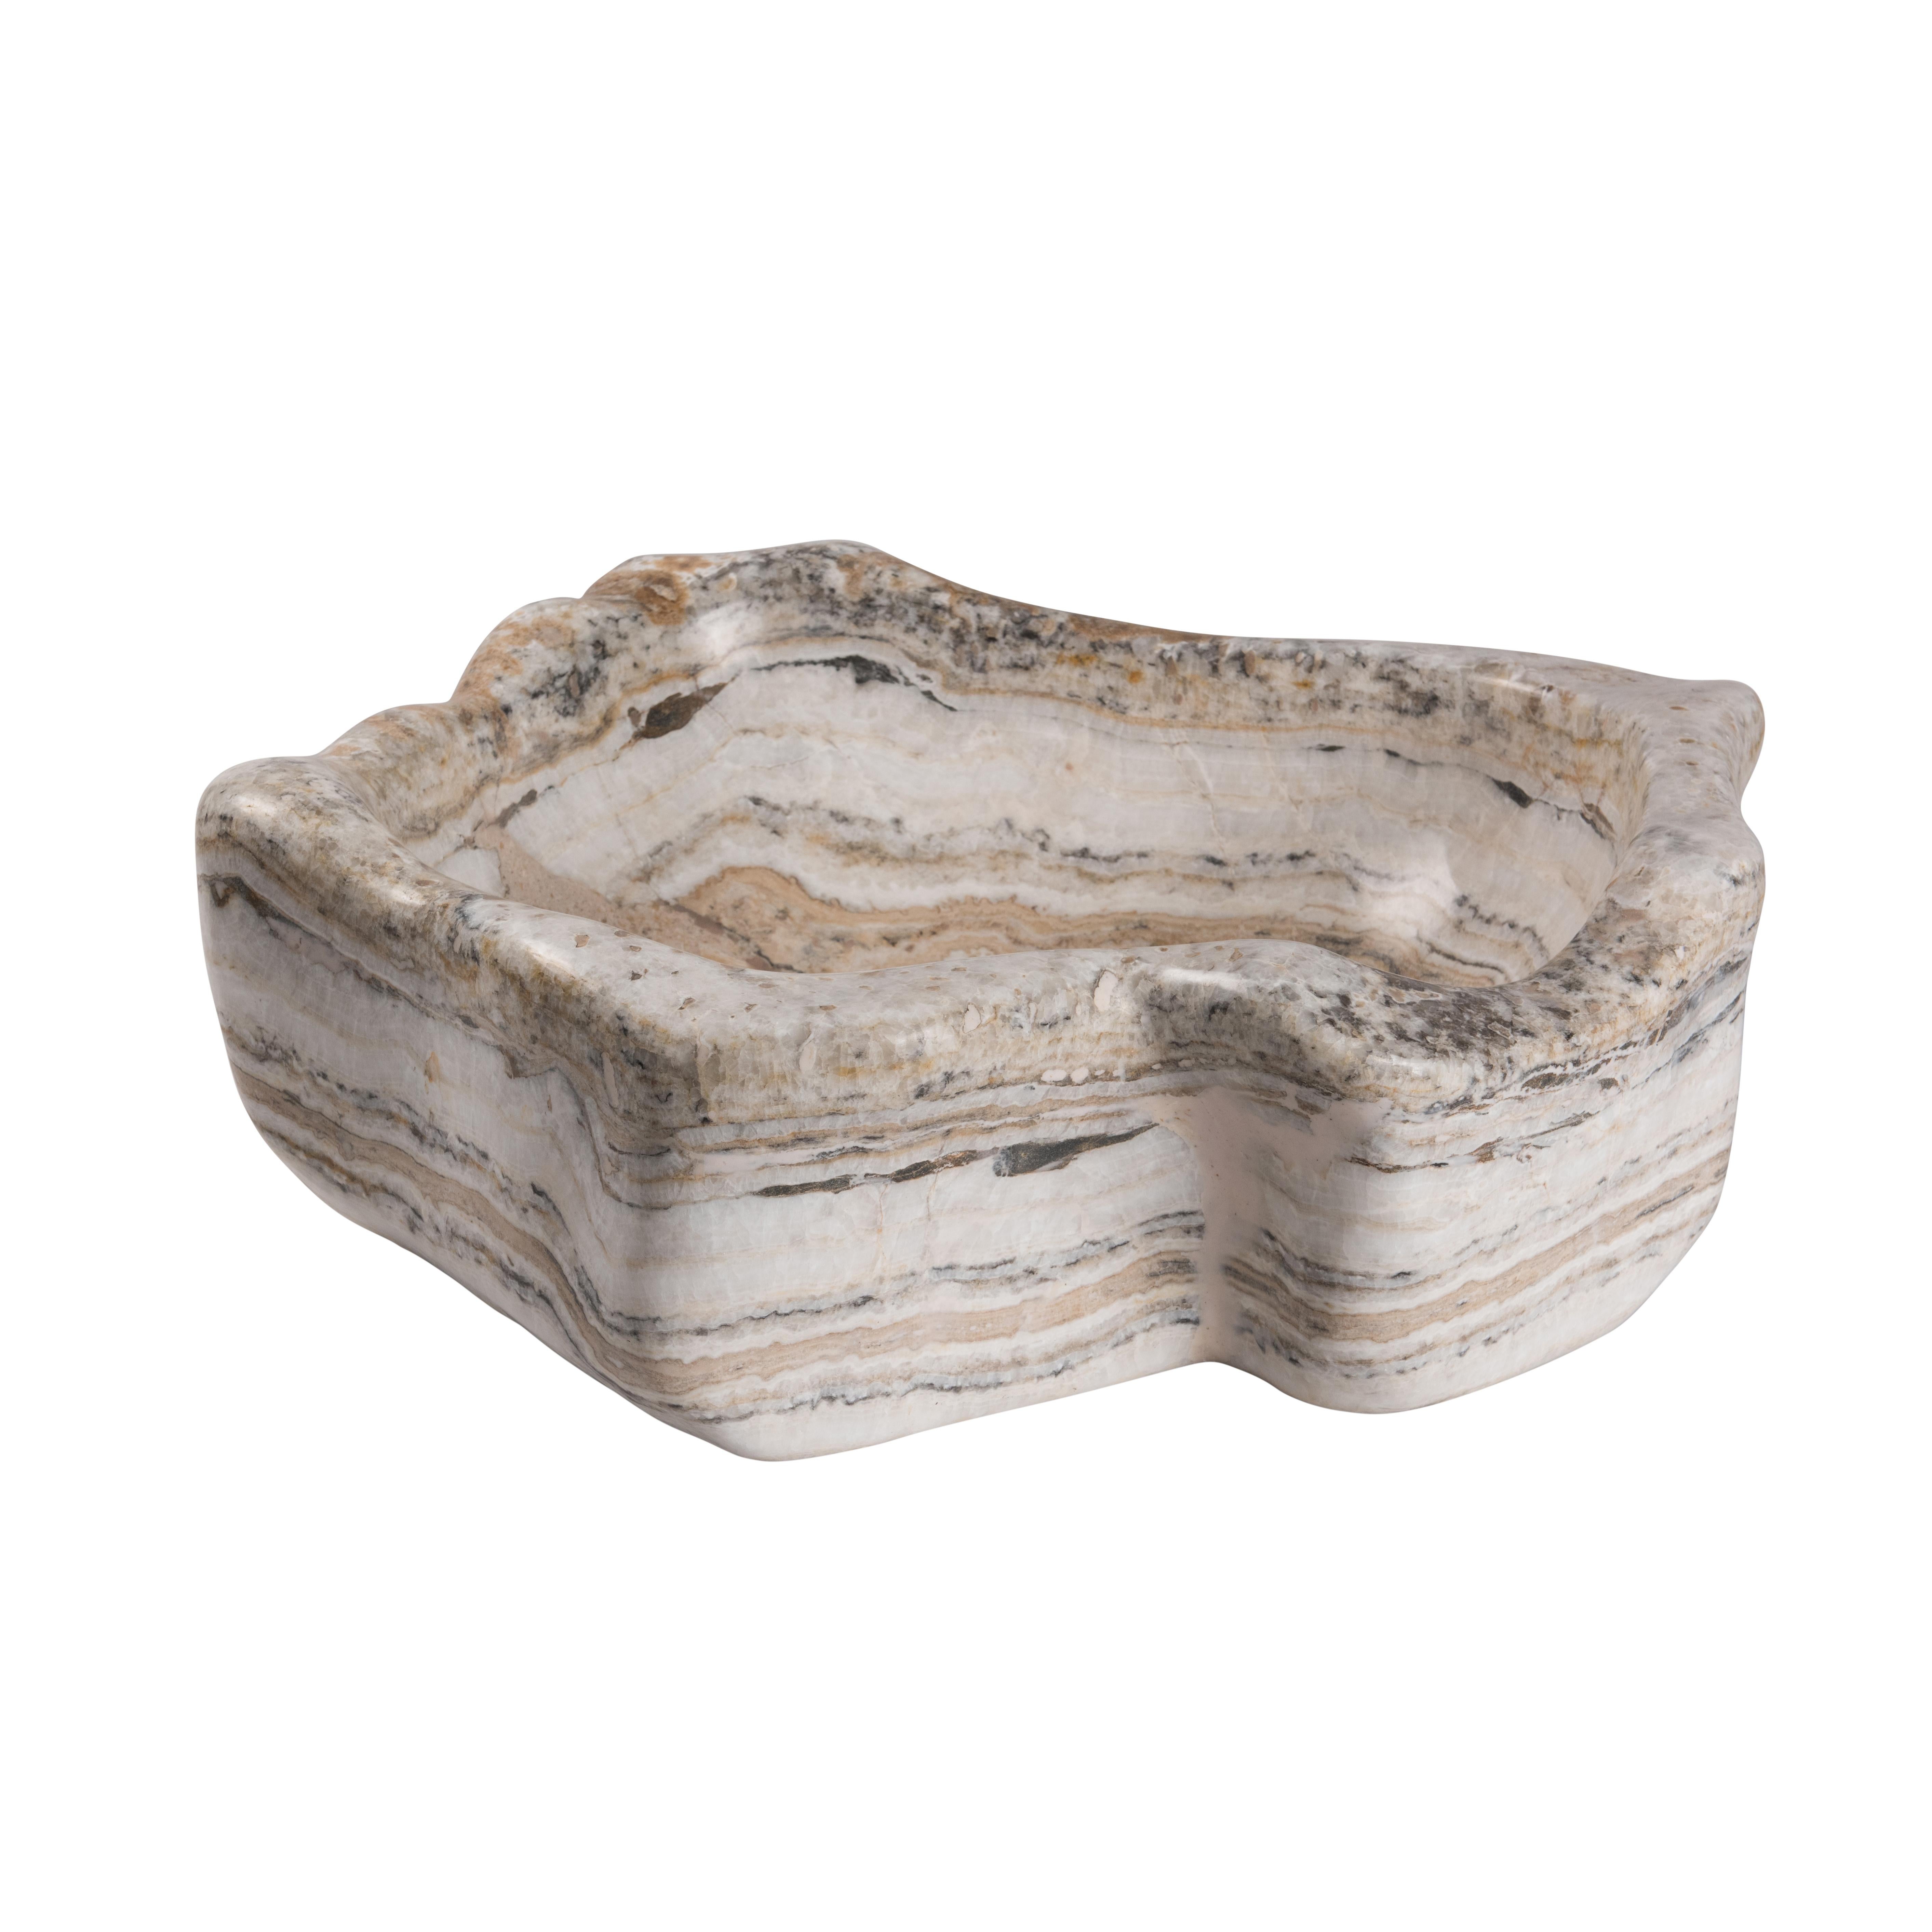 One of a collection of Onyx basins, polished to perfection, adding a touch of organic opulence to any room. The hand polished bowl makes it suitable for either a basin or a decorative object that will create a real focal point in any setting.